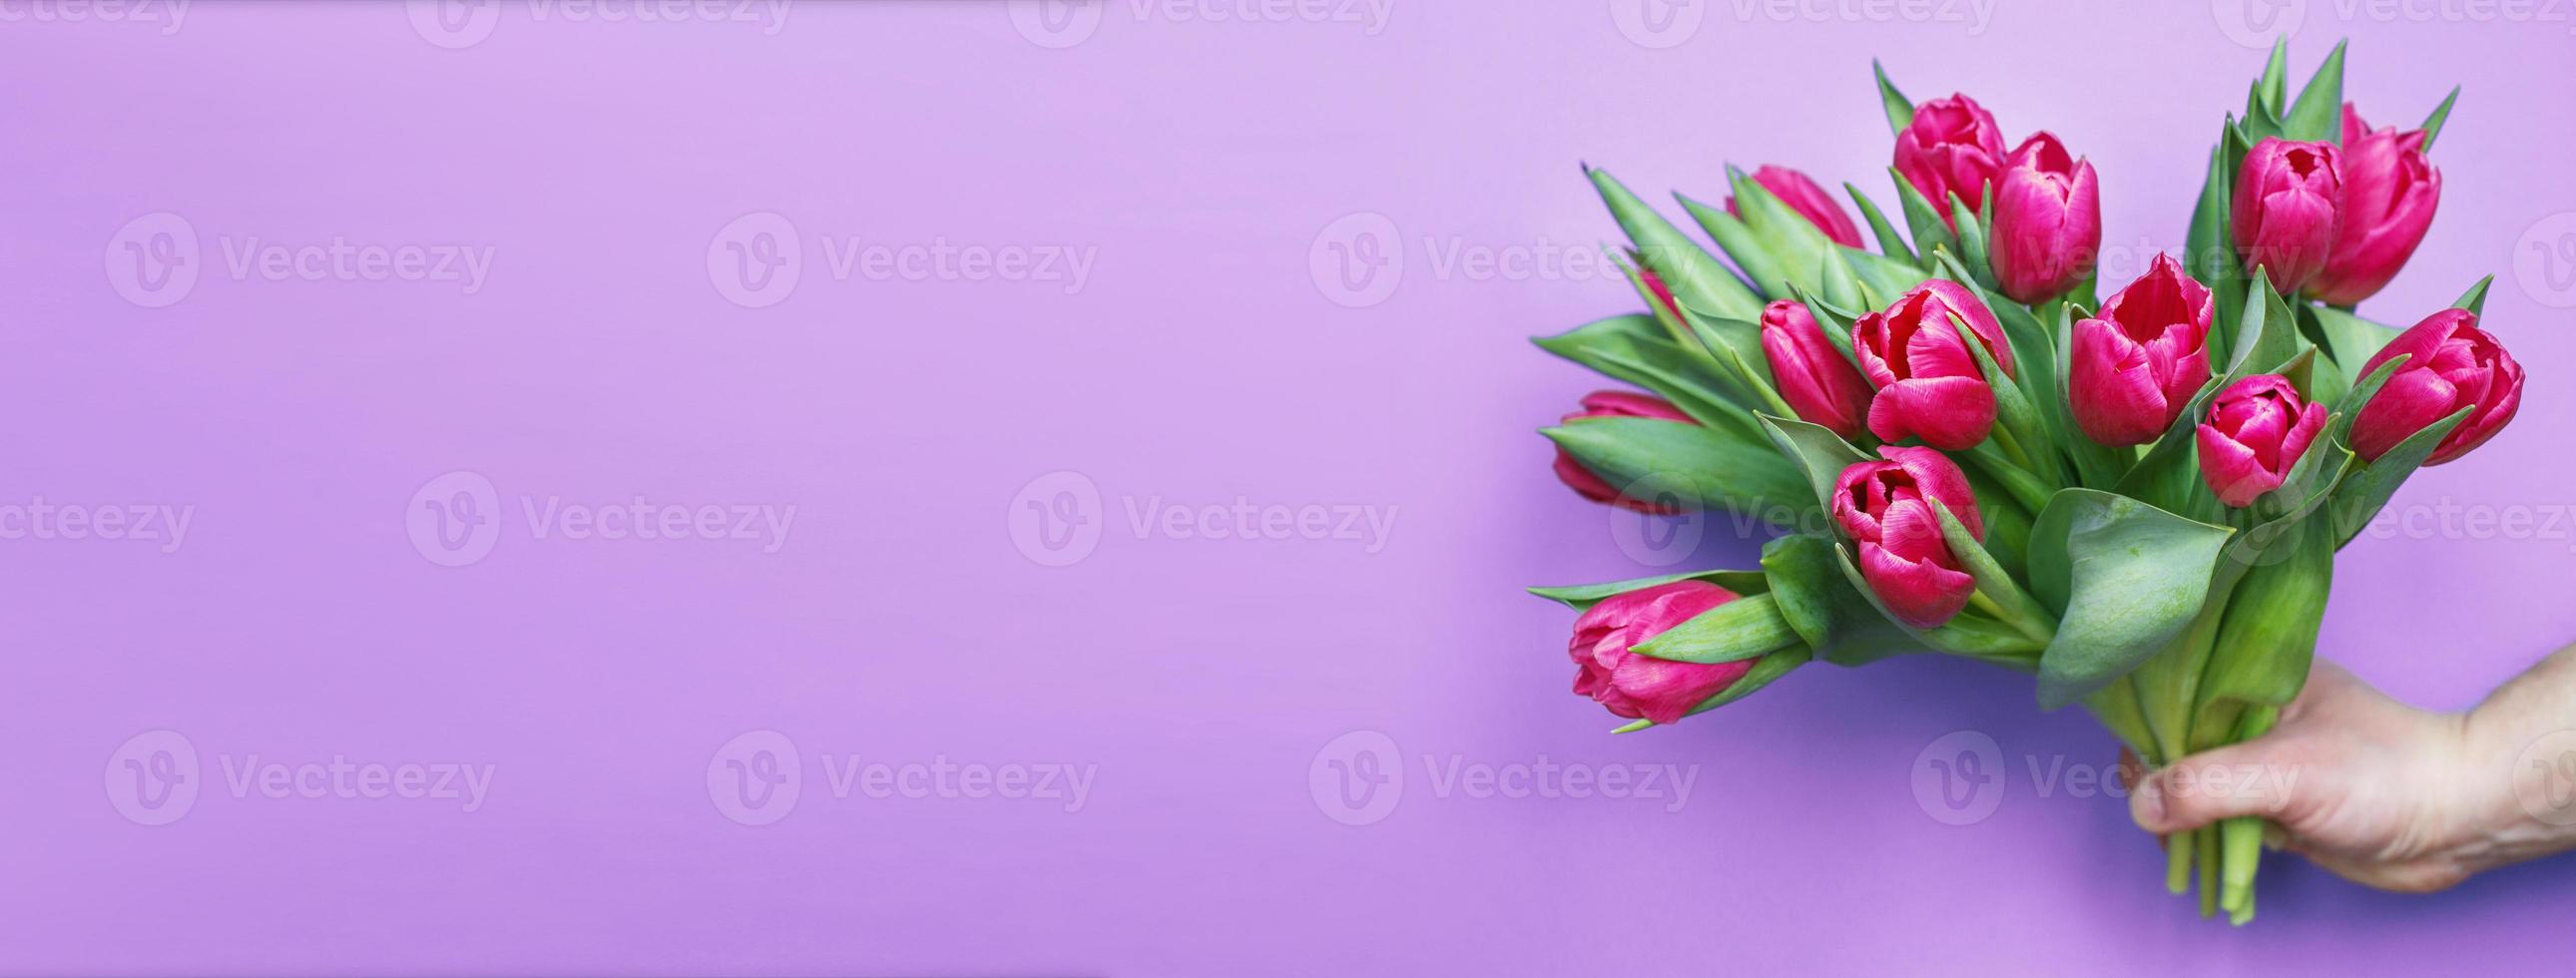 mans hand holding bouquet of fresh flowers tulips on purple pink background. photo